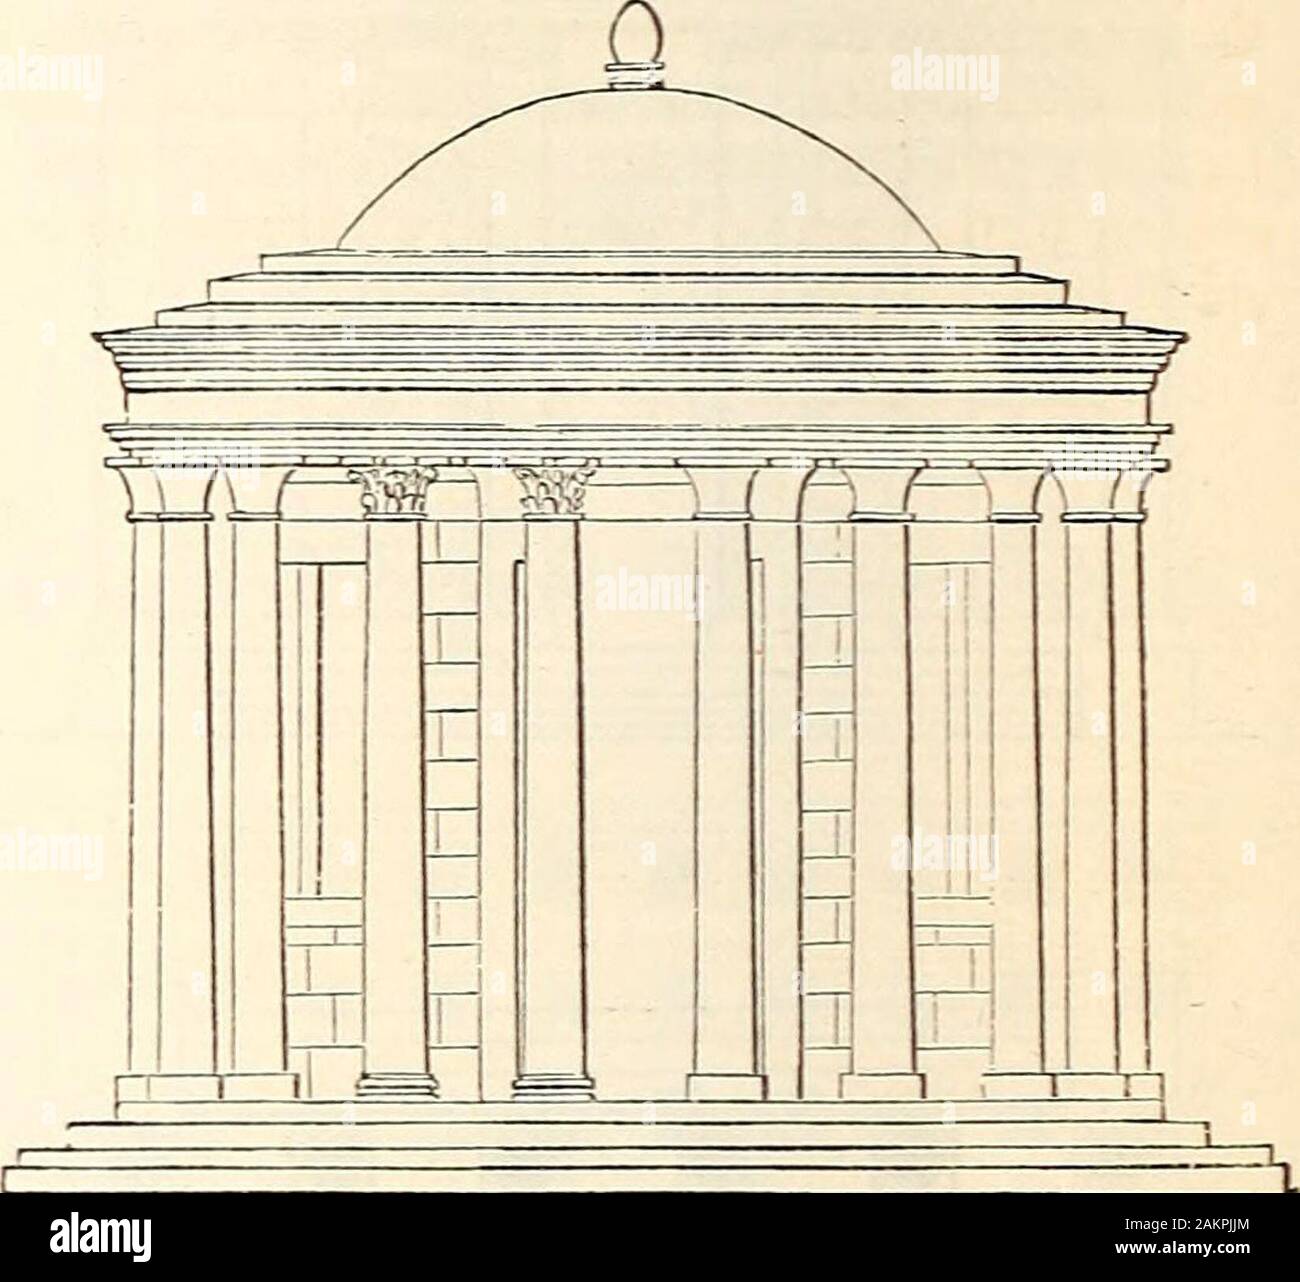 A dictionary of Greek and Roman antiquities.. . TEMPLUM. II. The Peripteros had a circular cella sur-rounded by a single peristyle of columns, standingon three steps, and the whole surmounted by adome. Specimens are preserved in the so-calledtemples of Vesta at Rome (see wood-cut on p. 299)and at Tivoli.. Stock Photo